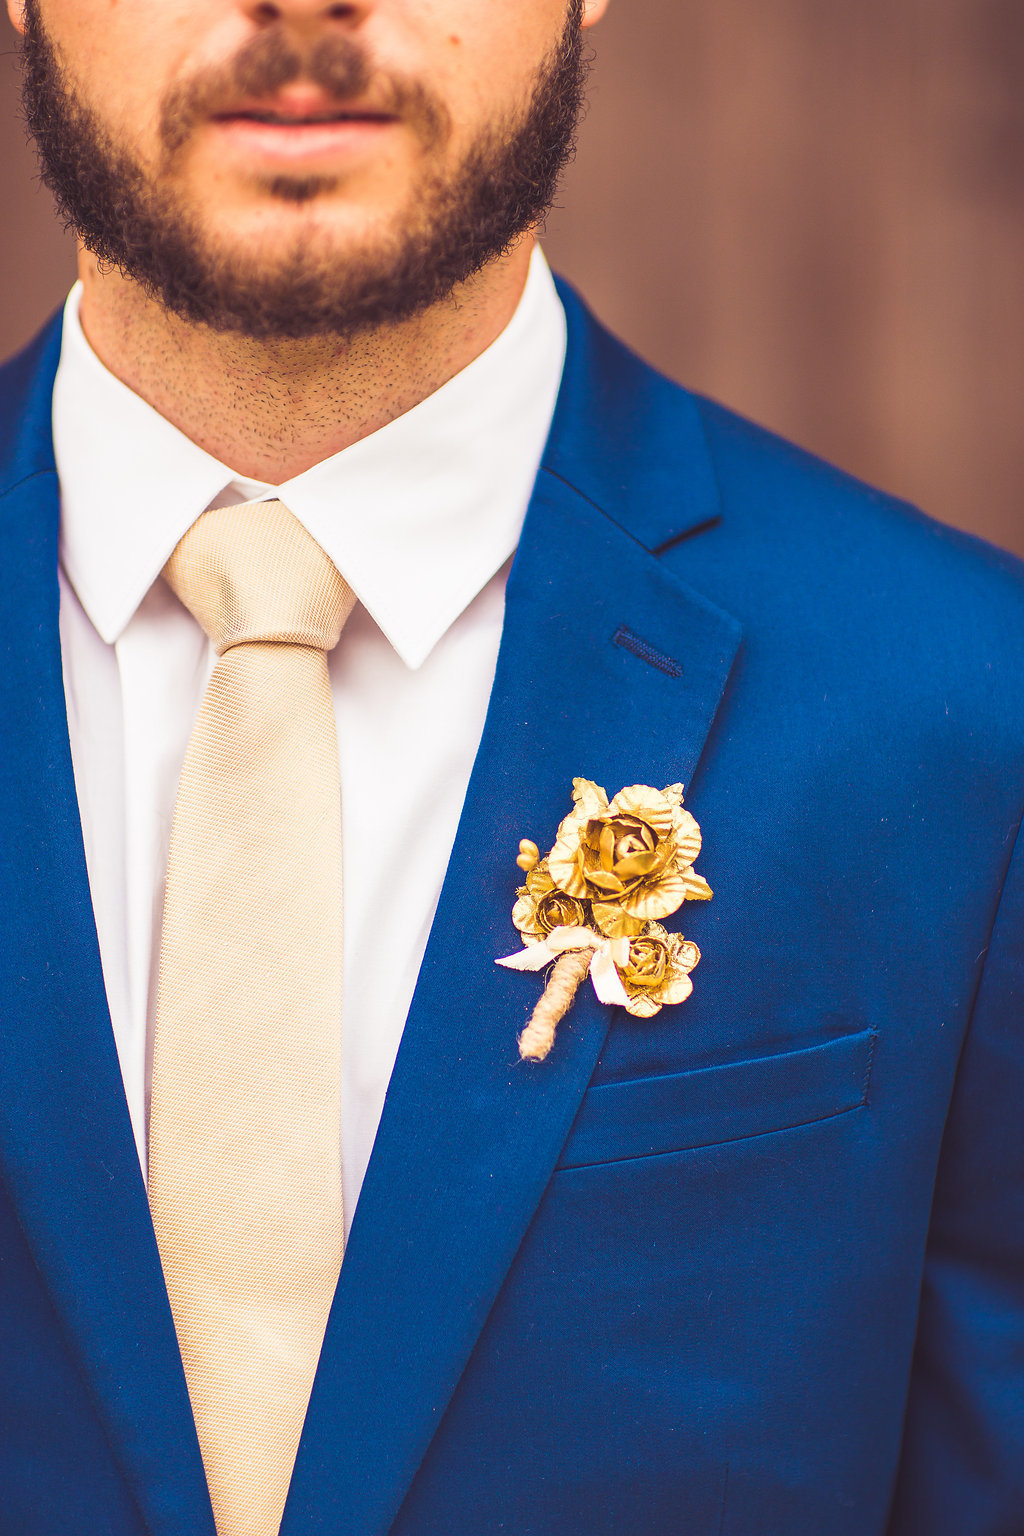 Wedding Photograph Of Man in a Blue Suit Los Angeles